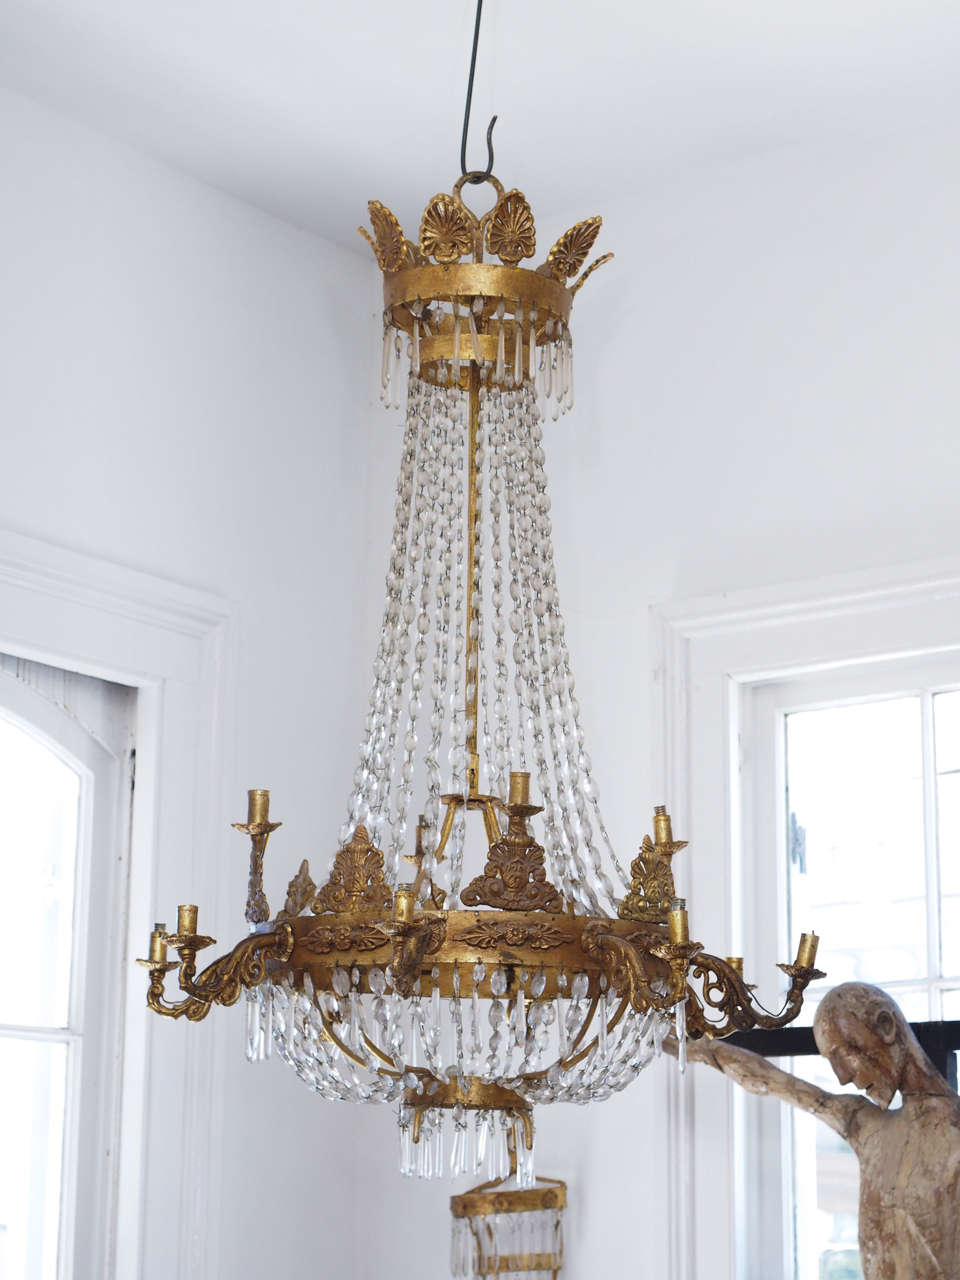 Italian iron and crystal chandelier, 19th century have been wired after photo.